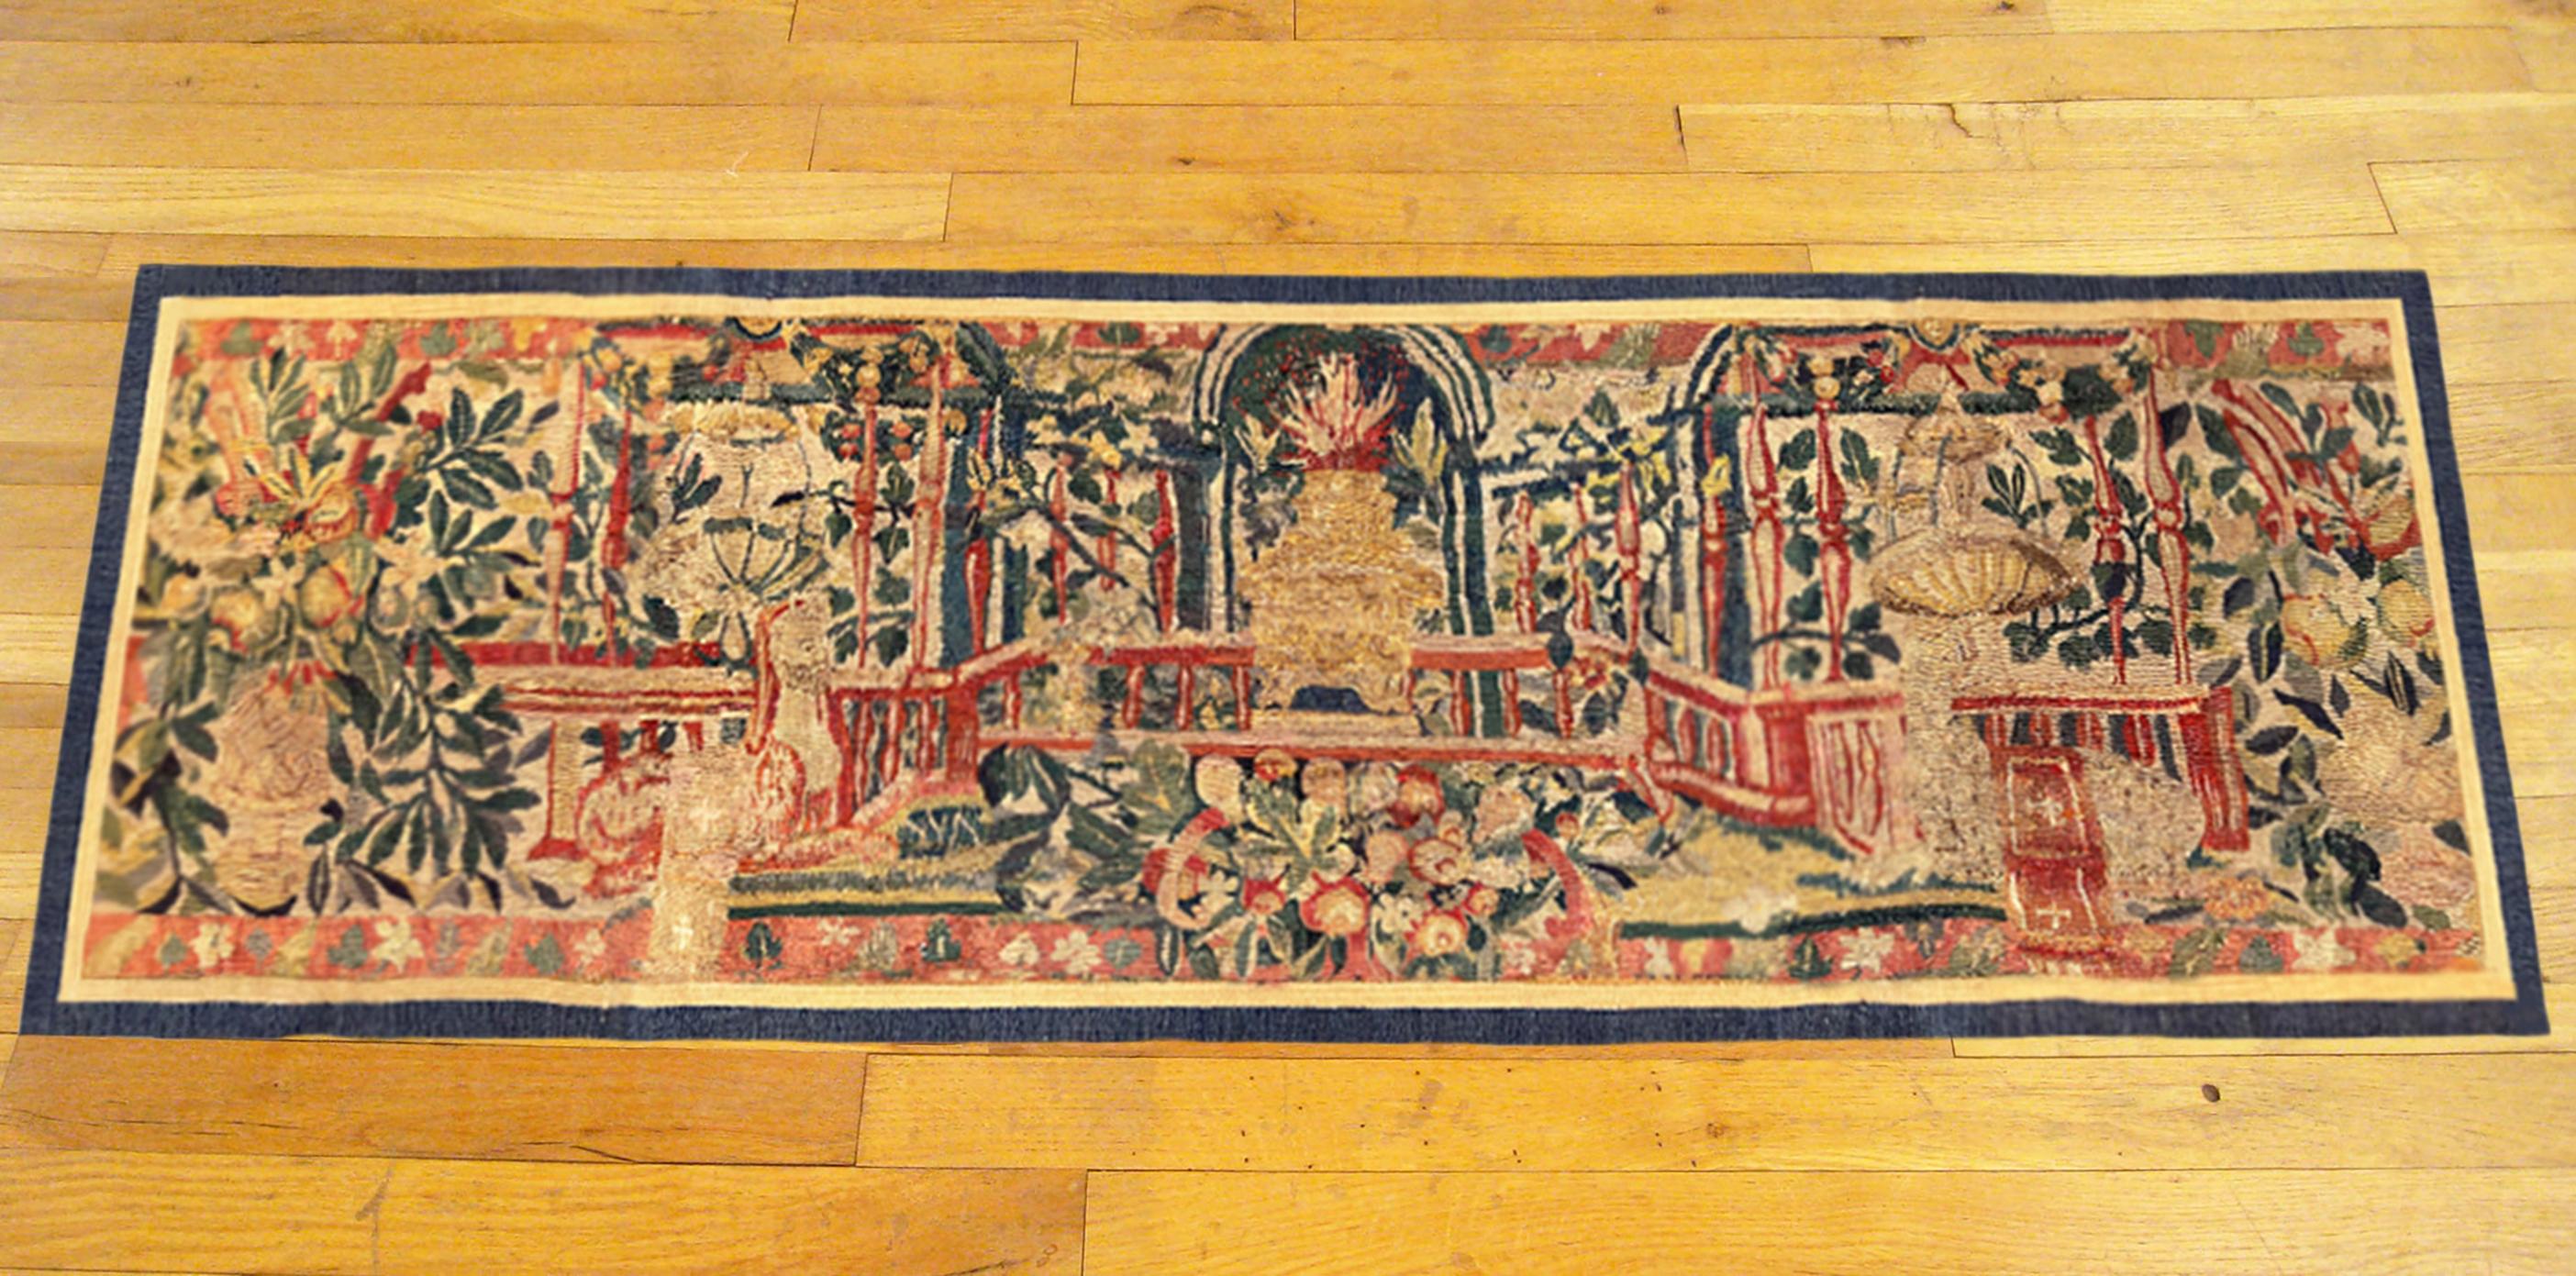 A late 16th century Flemish historical tapestry panel. This horizontally oriented decorative tapestry panel depicts a stylized staircase at center, with flowers and leaves throughout, as well as lanterns and other elements. The central area is